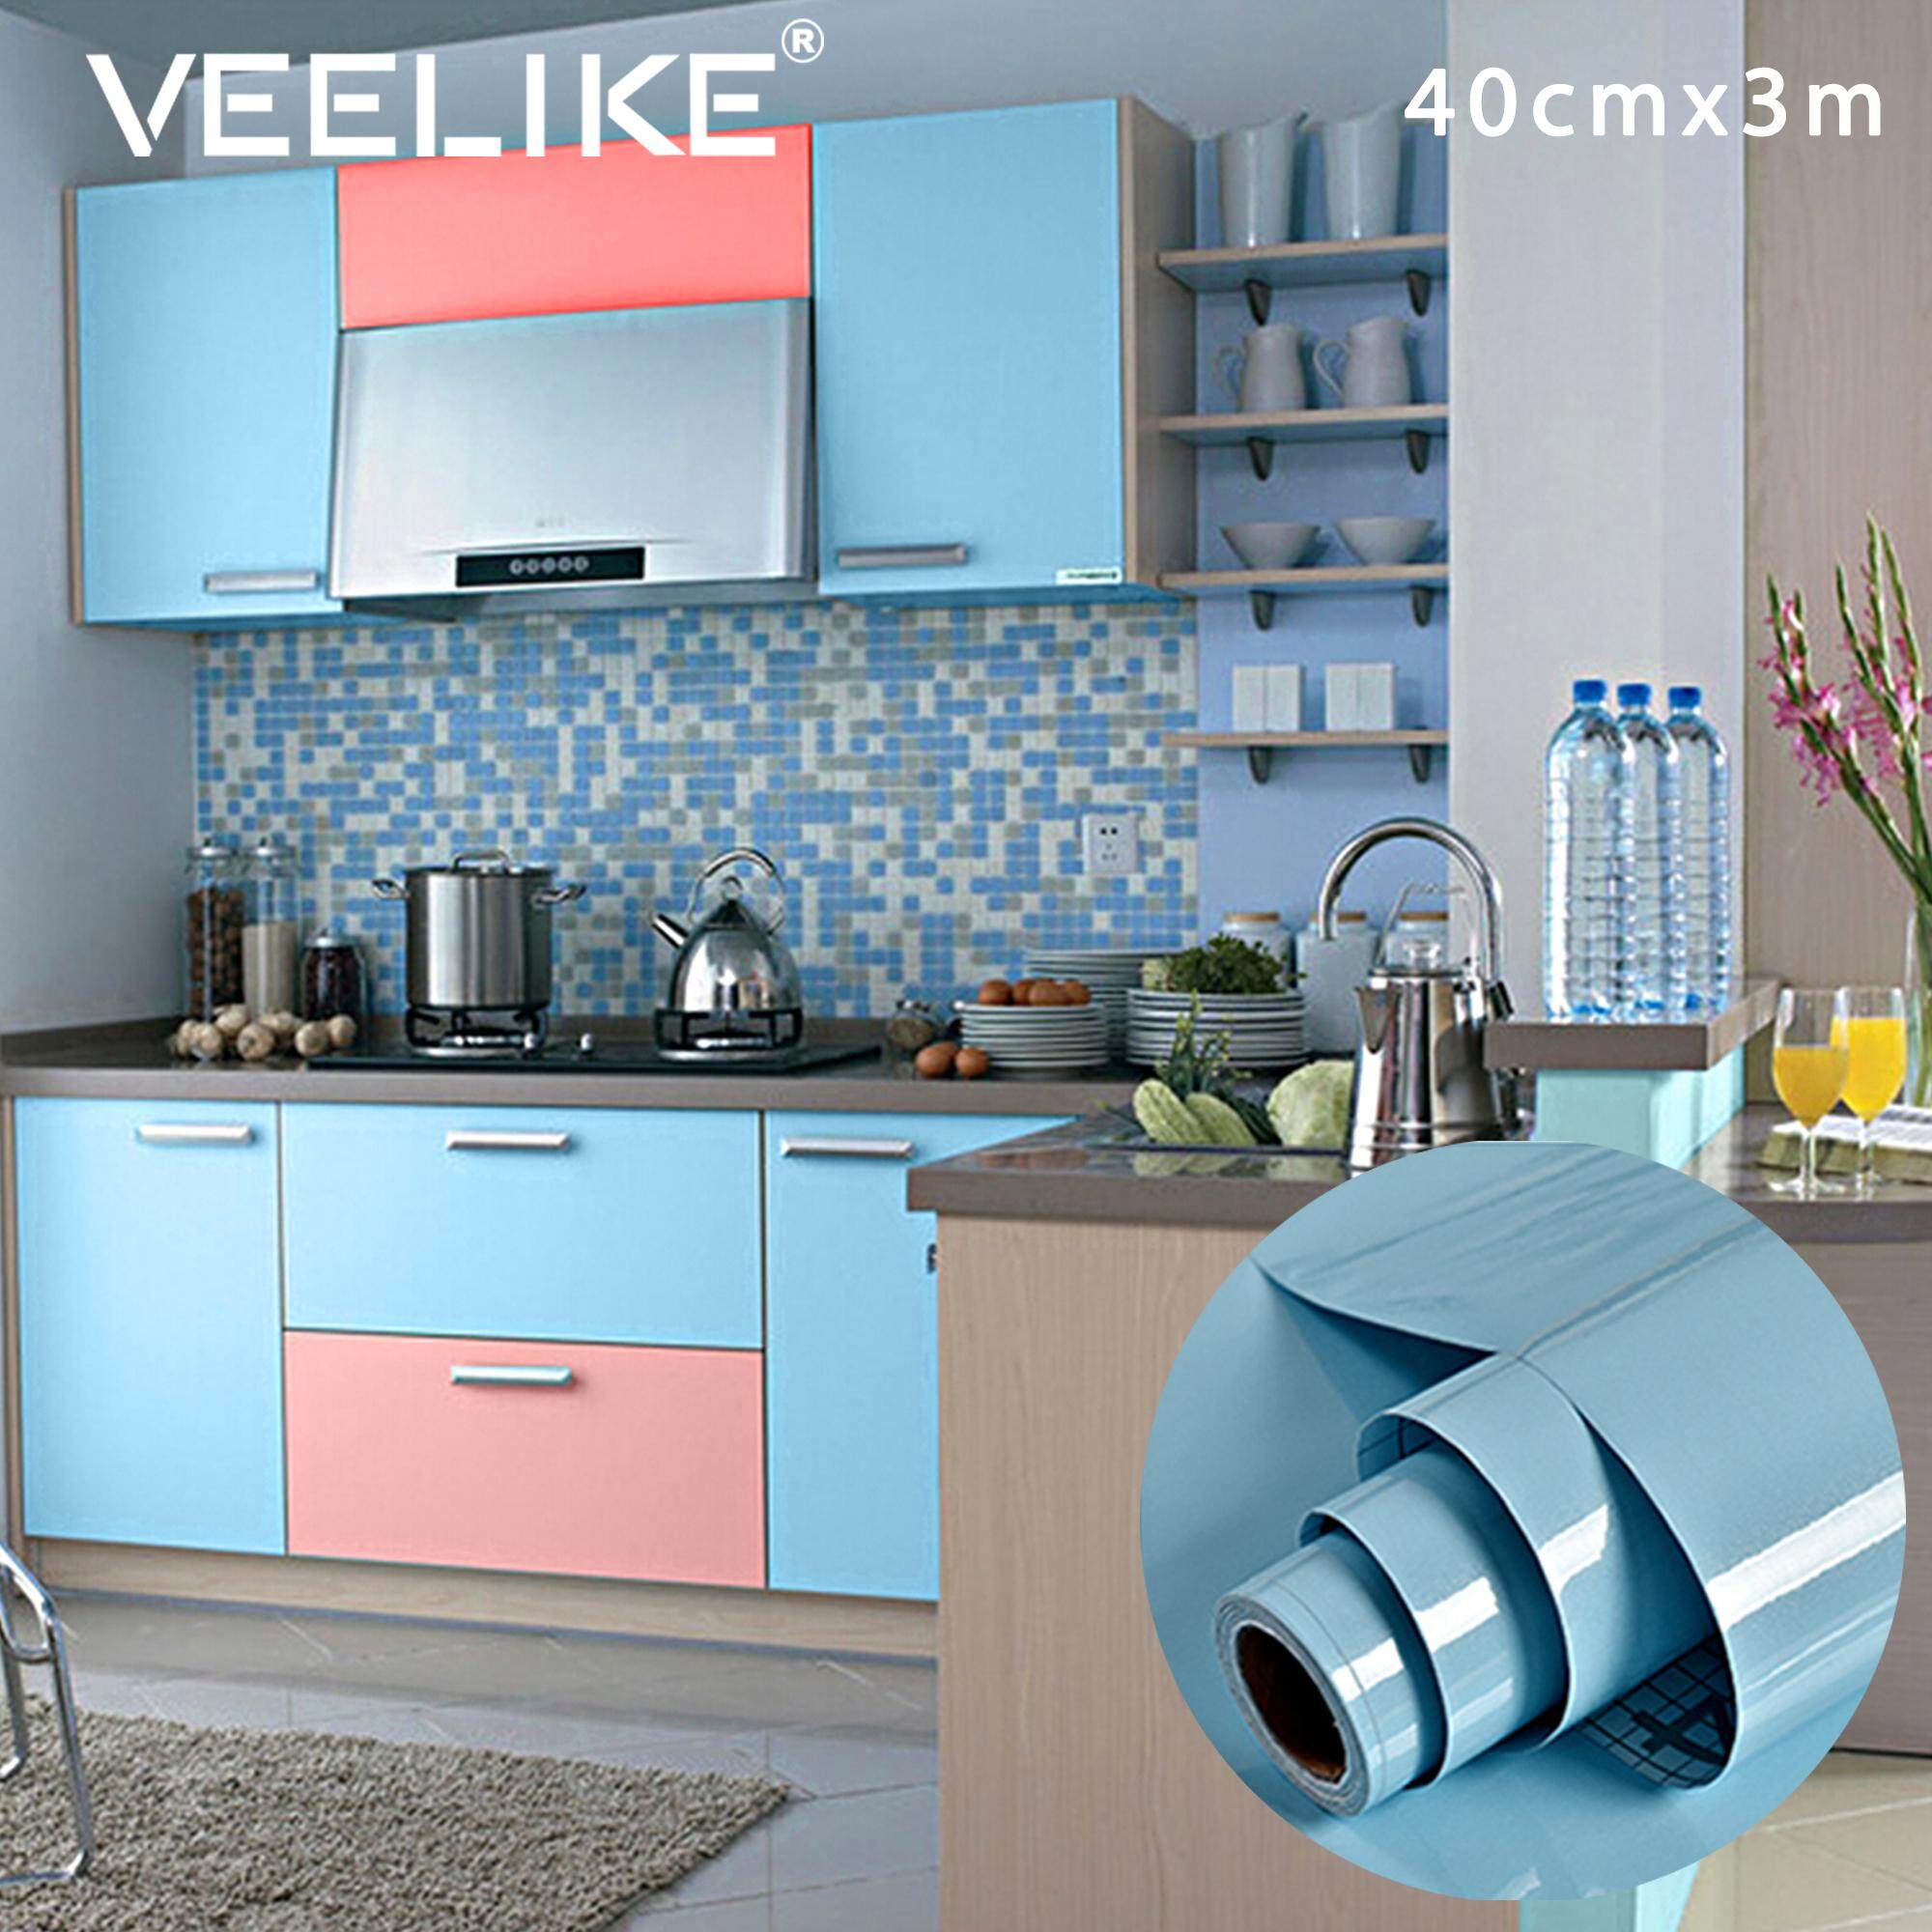 Veelike Glossy Kitchen Cabinet Wallpaper Self Adhesive Wall Stickers Waterproof Oil-proof Contact Paper for Kitchen Countertops Peel and Stick Vinyl Removable 40cm×3m